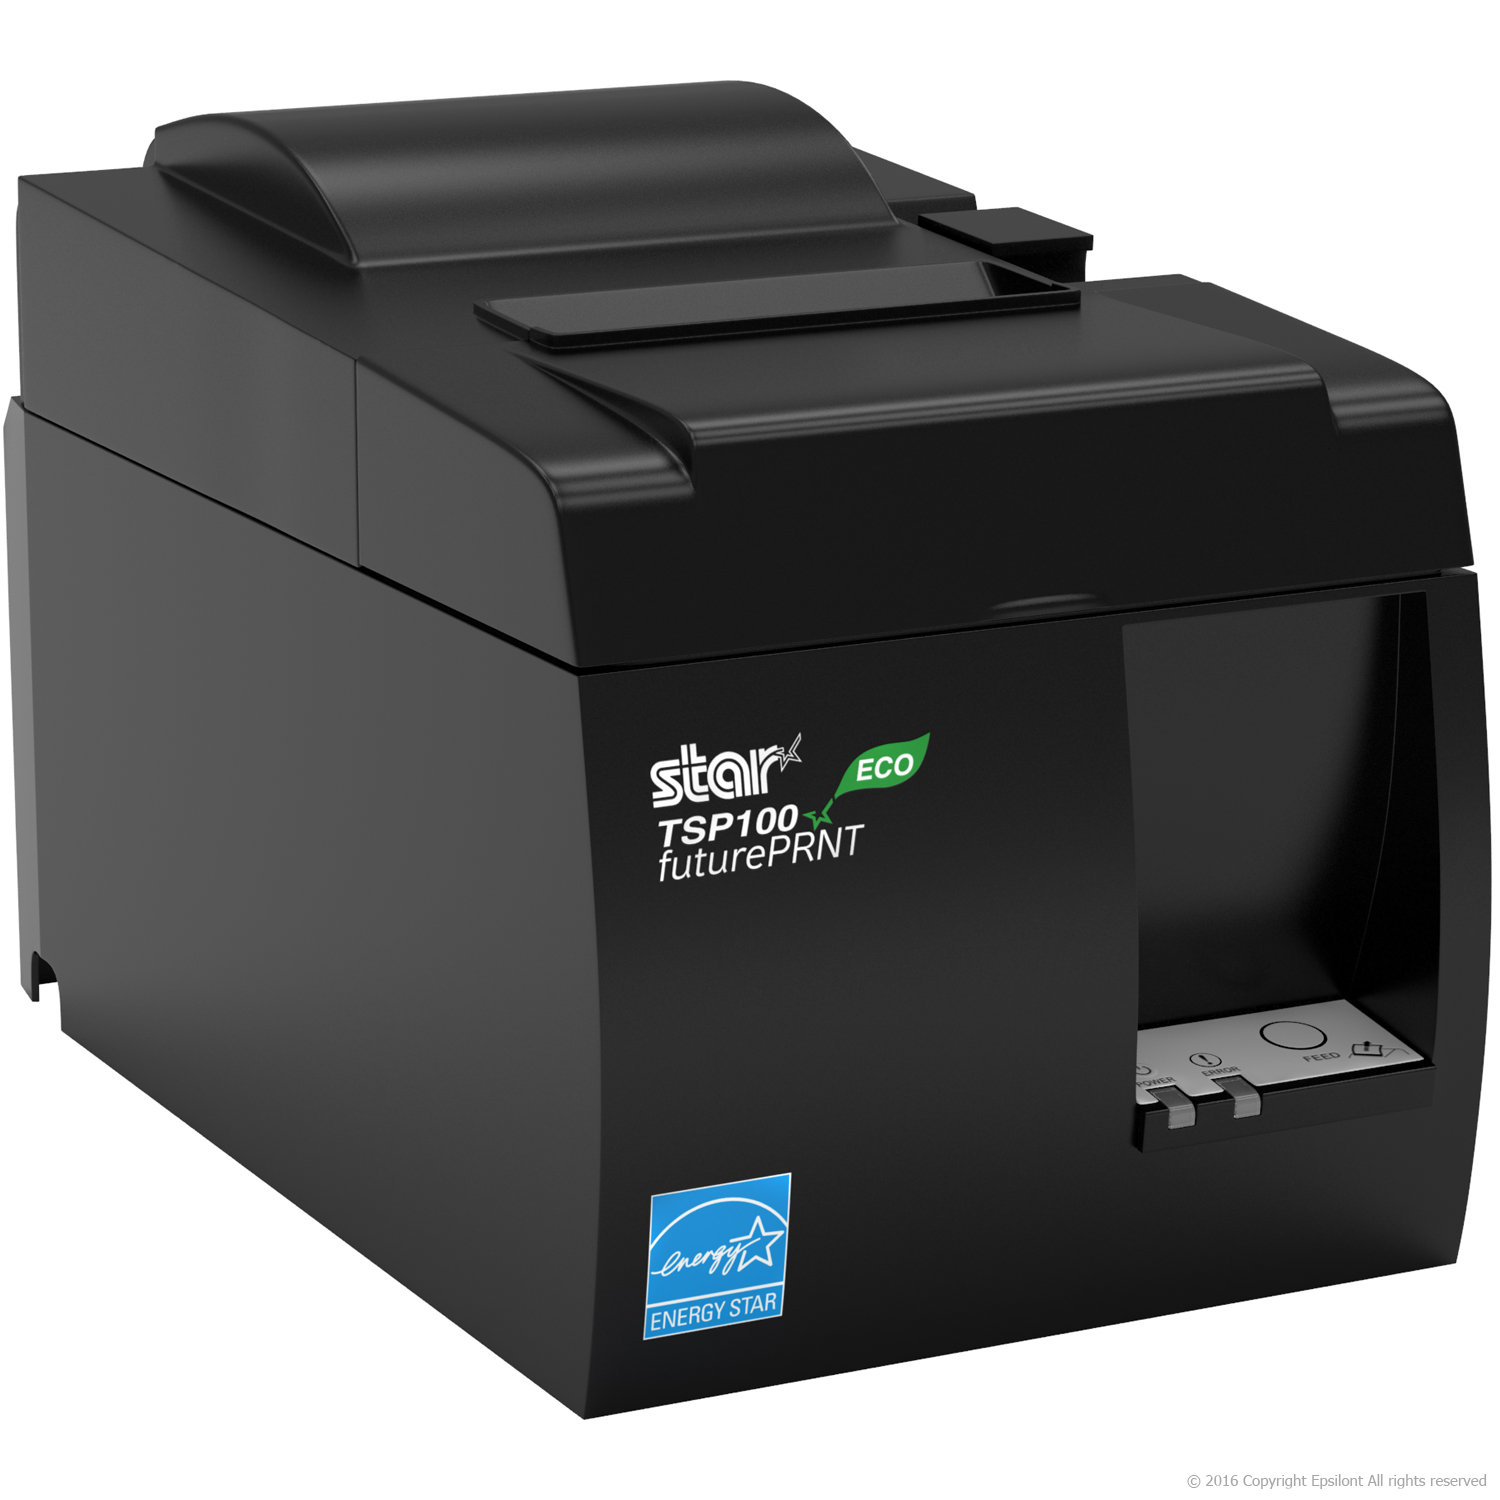 Build a powerful POS system with eHopper and Star Micronics